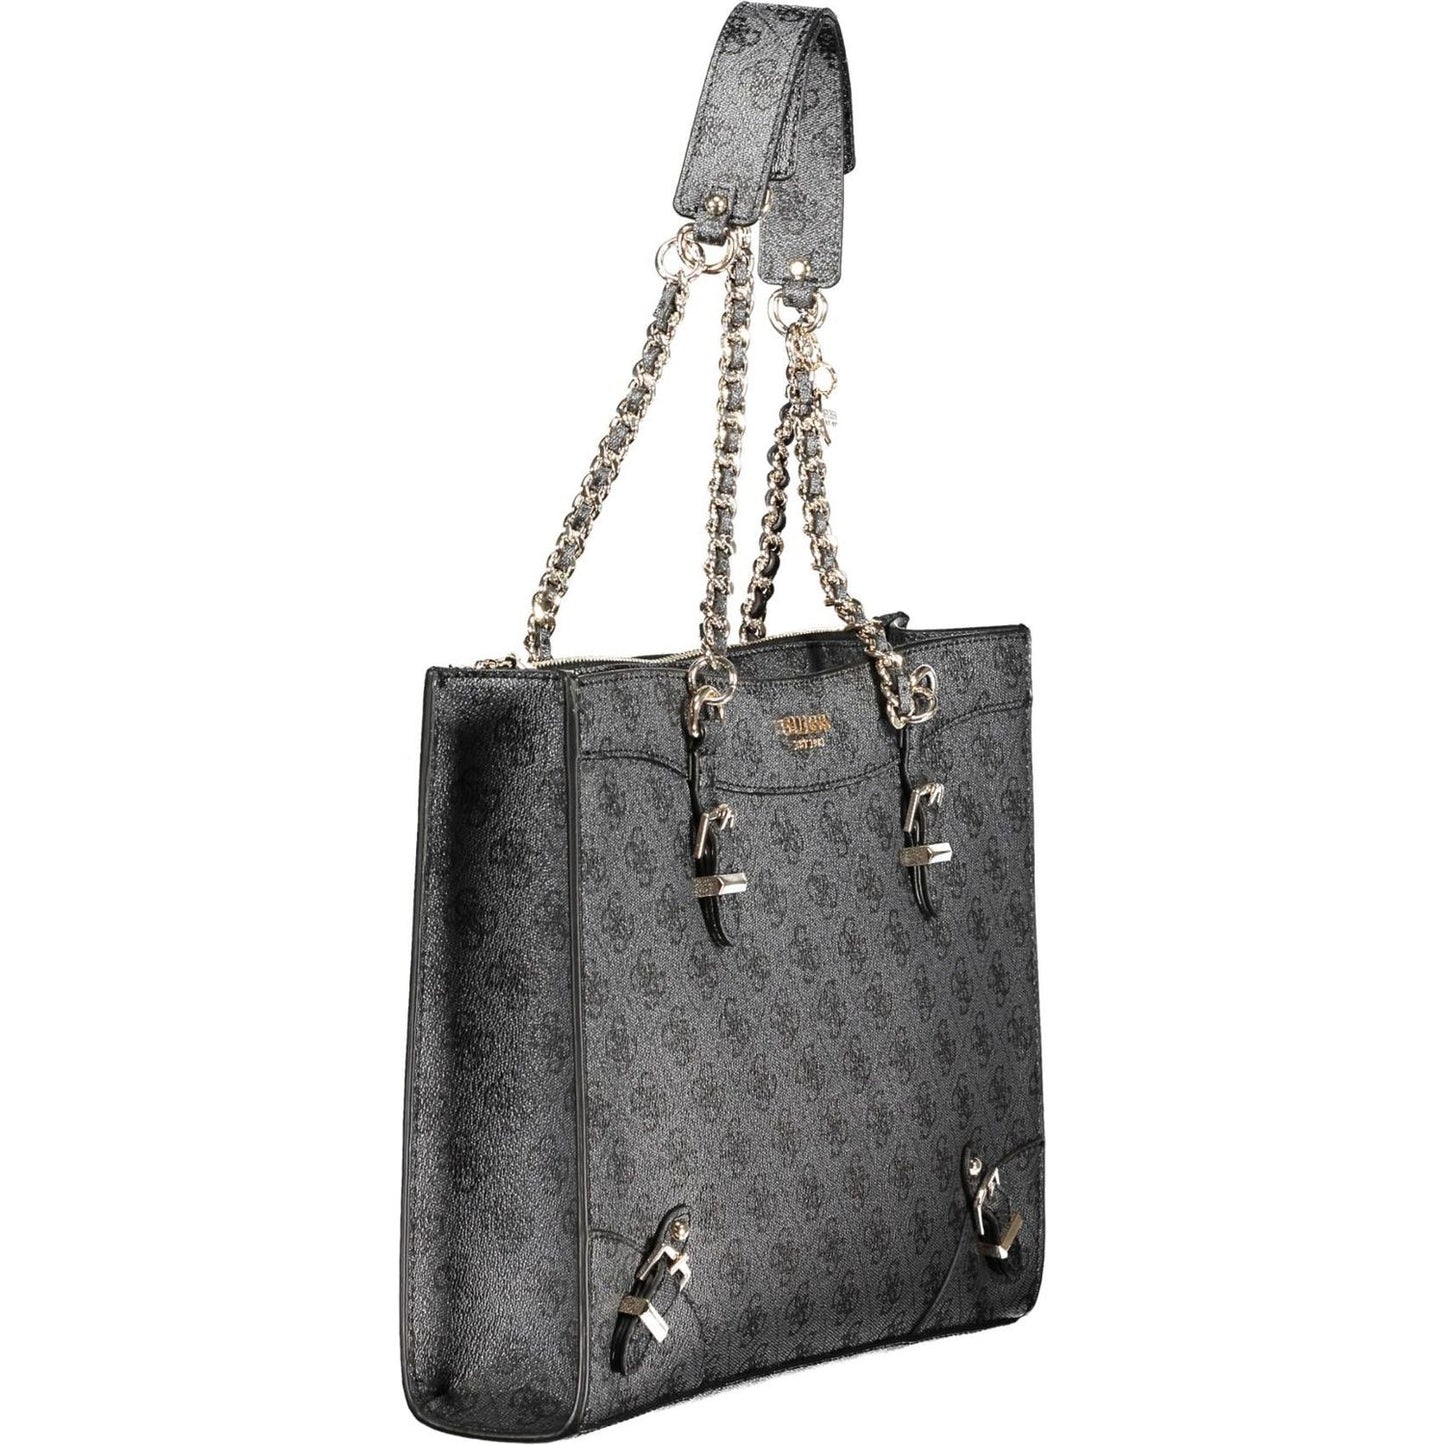 Guess Jeans Chic Black Chain Handled Shoulder Bag chic-black-chain-handled-shoulder-bag